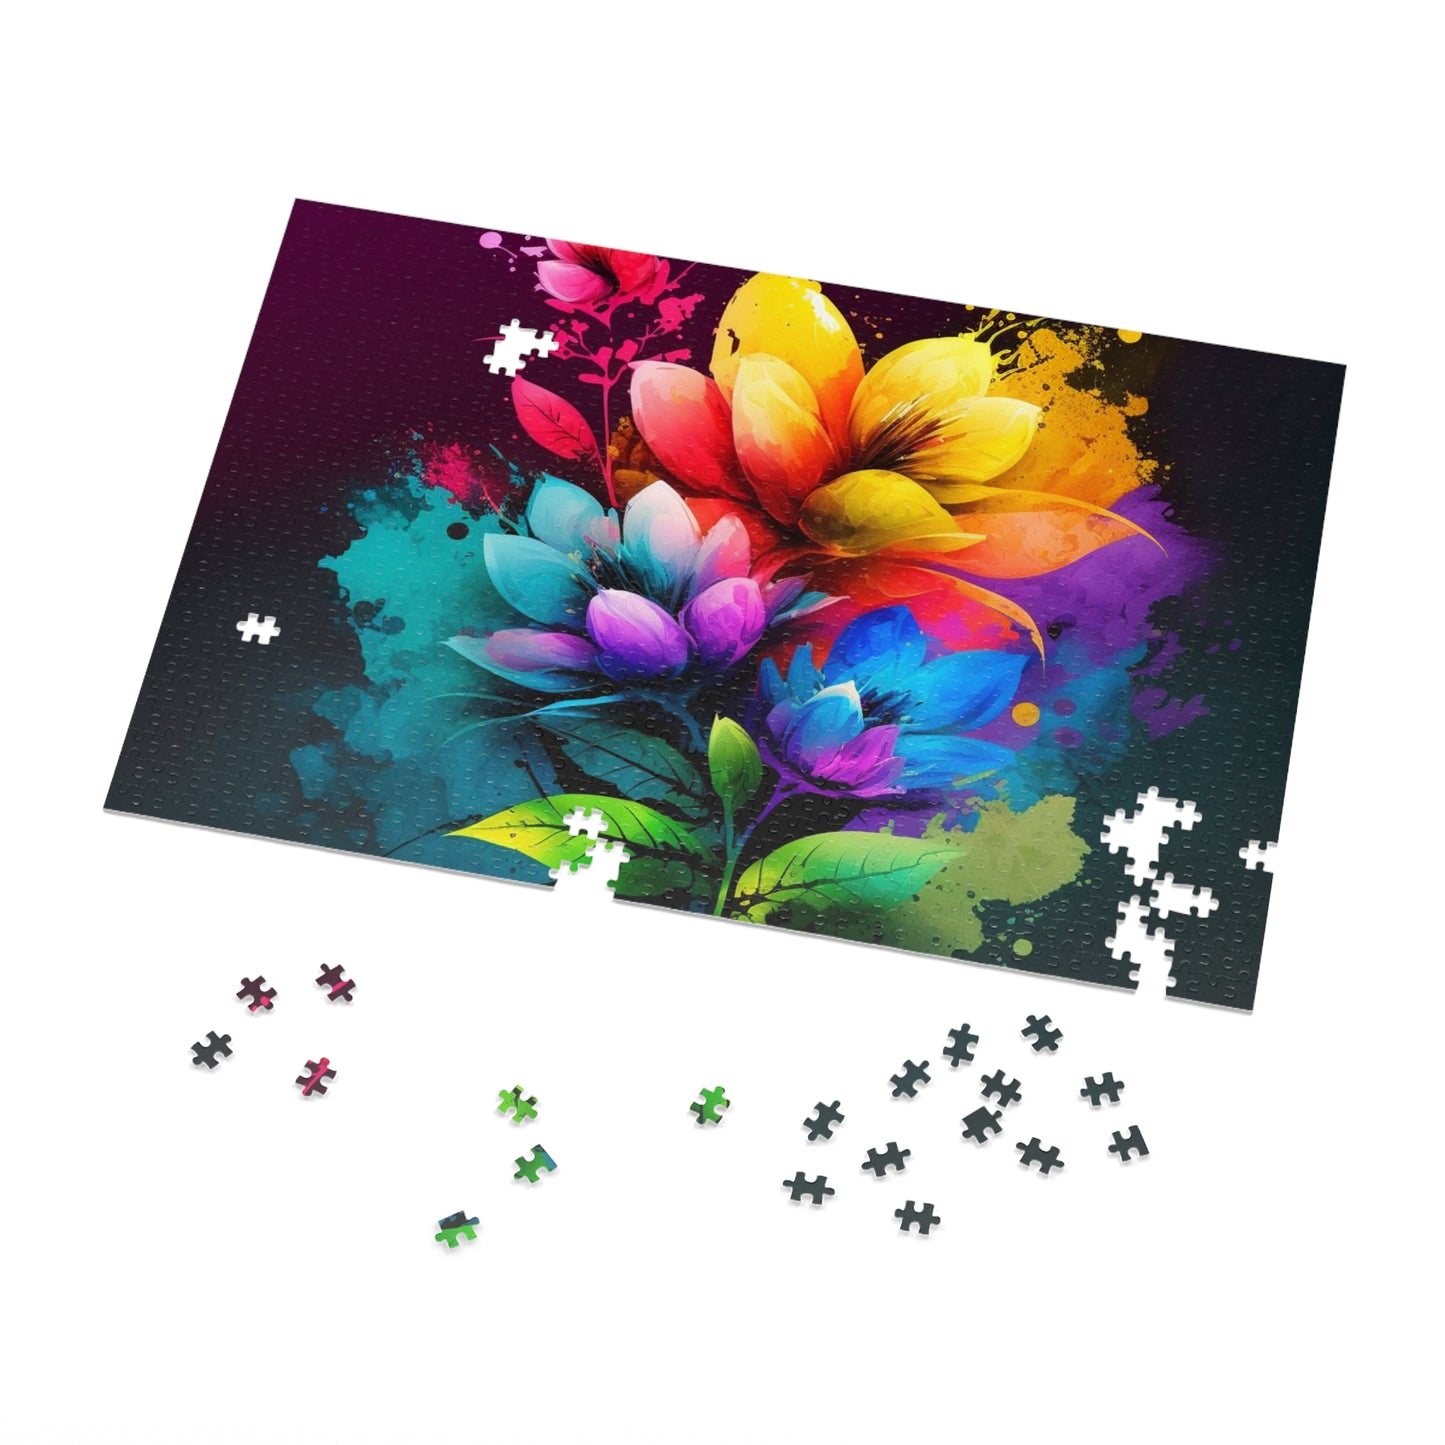 Jigsaw Puzzle (30, 110, 252, 500,1000-Piece) Bright Spring Flowers 3